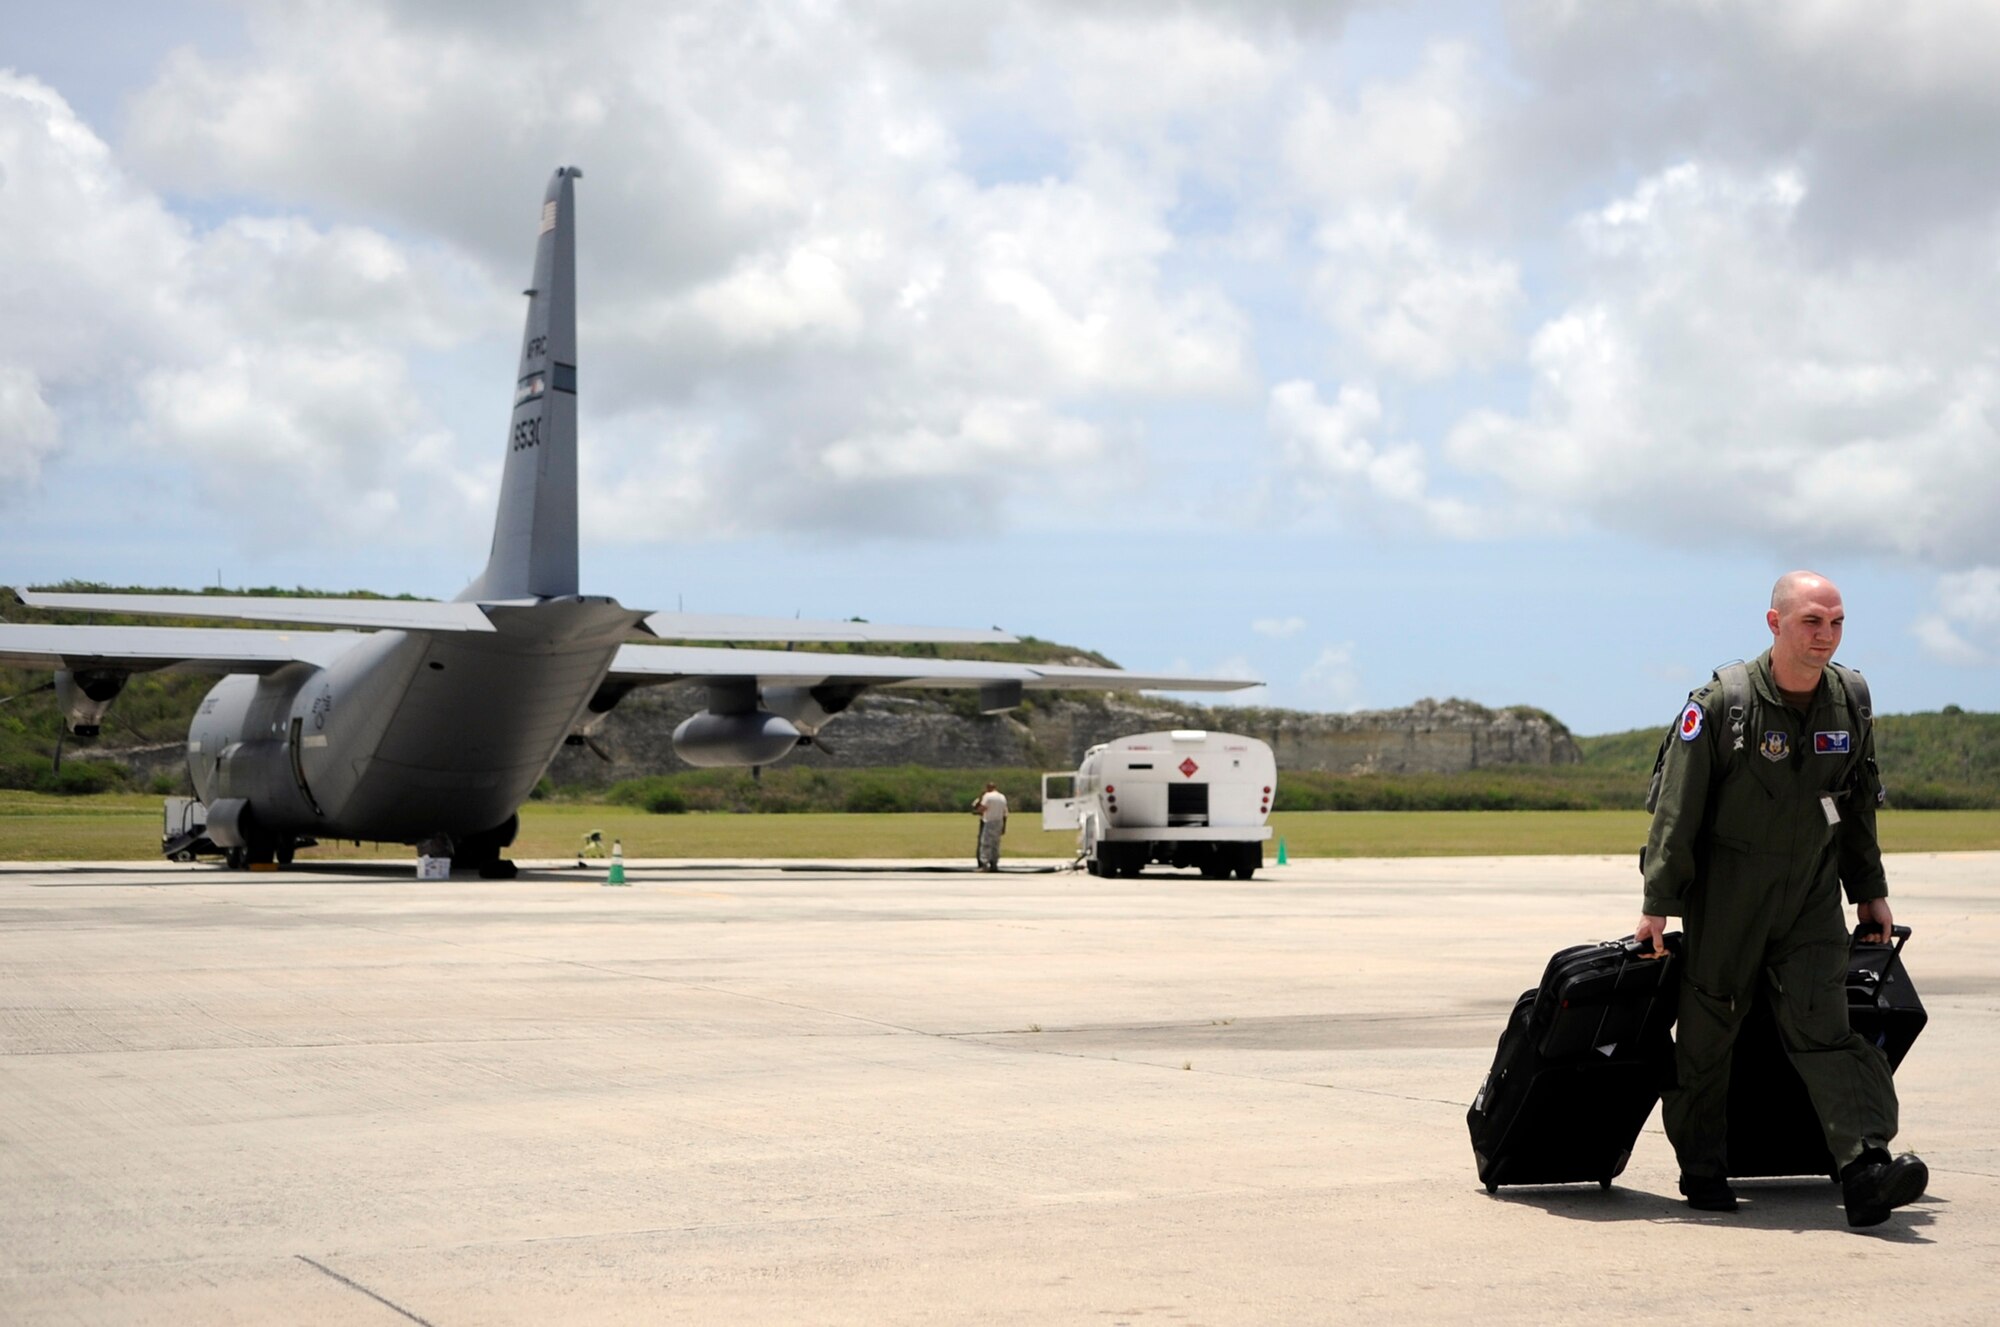 Capt. Tobi Baker arrives at St. Croix, V.I., after a training mission on a WC-130J  Hercules from Keesler Air Force Base, Miss. Captain Baker is an aerial weather reconnaissance officer assigned to the Hurricane Hunters of the 53rd Weather Reconnaissance Squadron. (U.S. Air Force photo/Staff Sgt. Desiree N. Palacios)